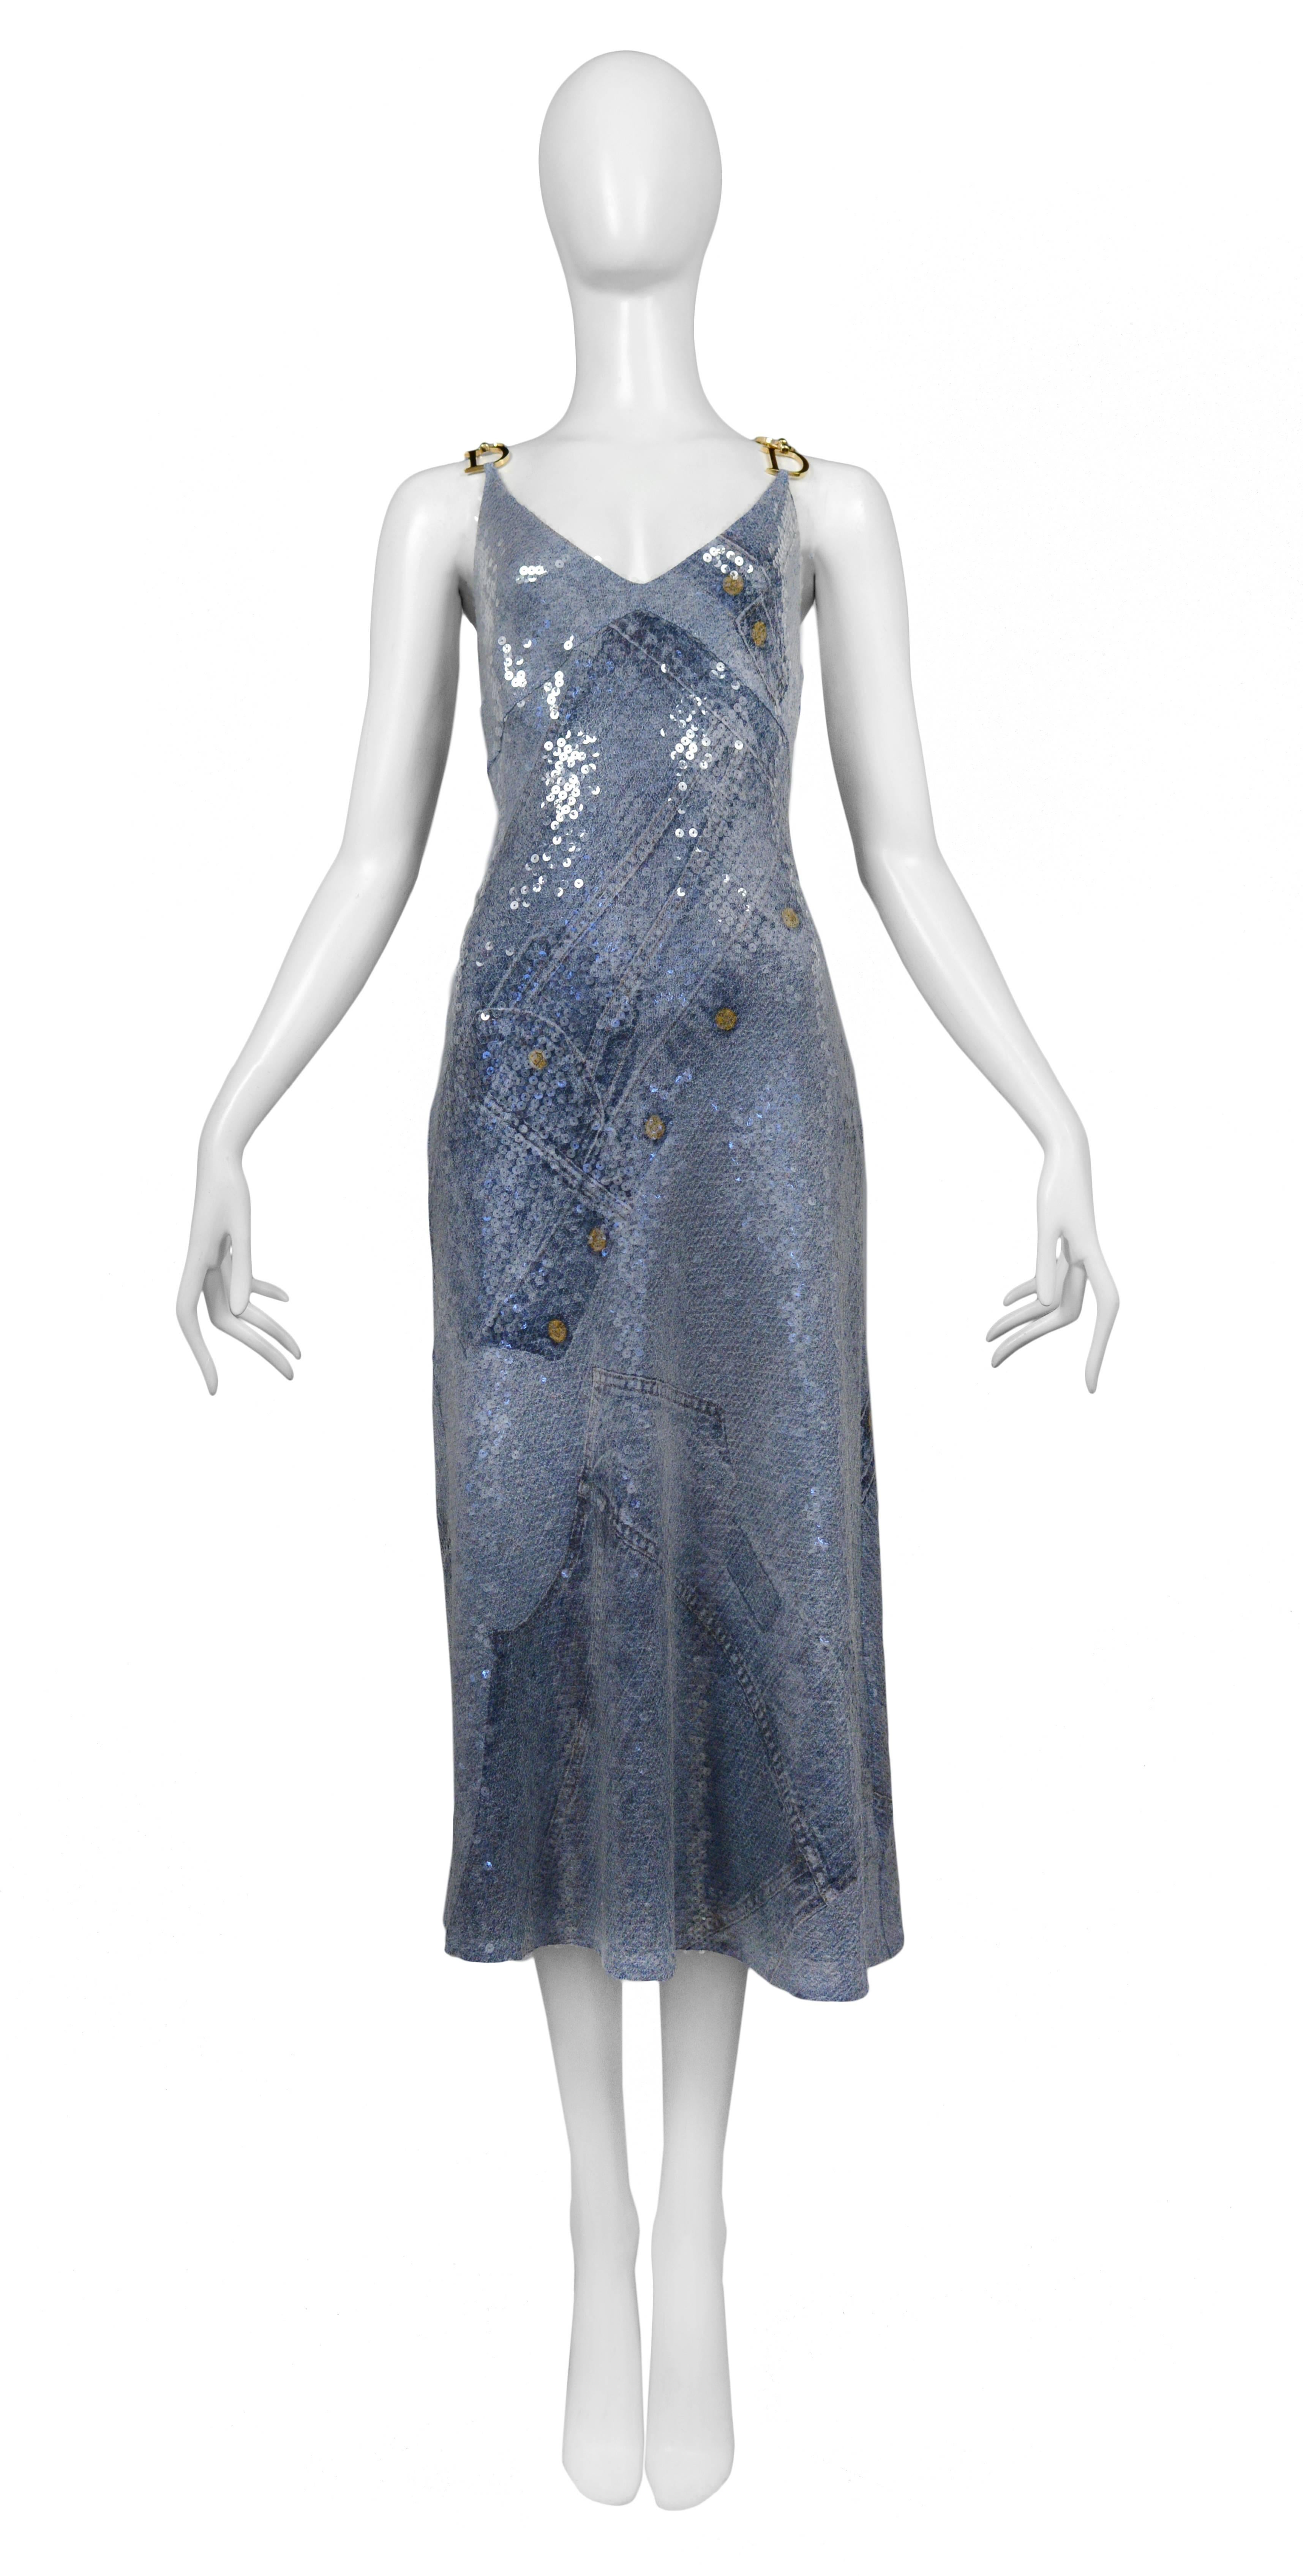 CHRISTIAN DIOR
SEQUIN TROMPE L'OEIL DENIM DRESS
Condition : Excellent Vintage Condition
John Galliano for Christian Dior trompe l'oeil denim print silk slip dress with clear sequins and metal CD hardware at straps. Collection circa, 2000.

Please